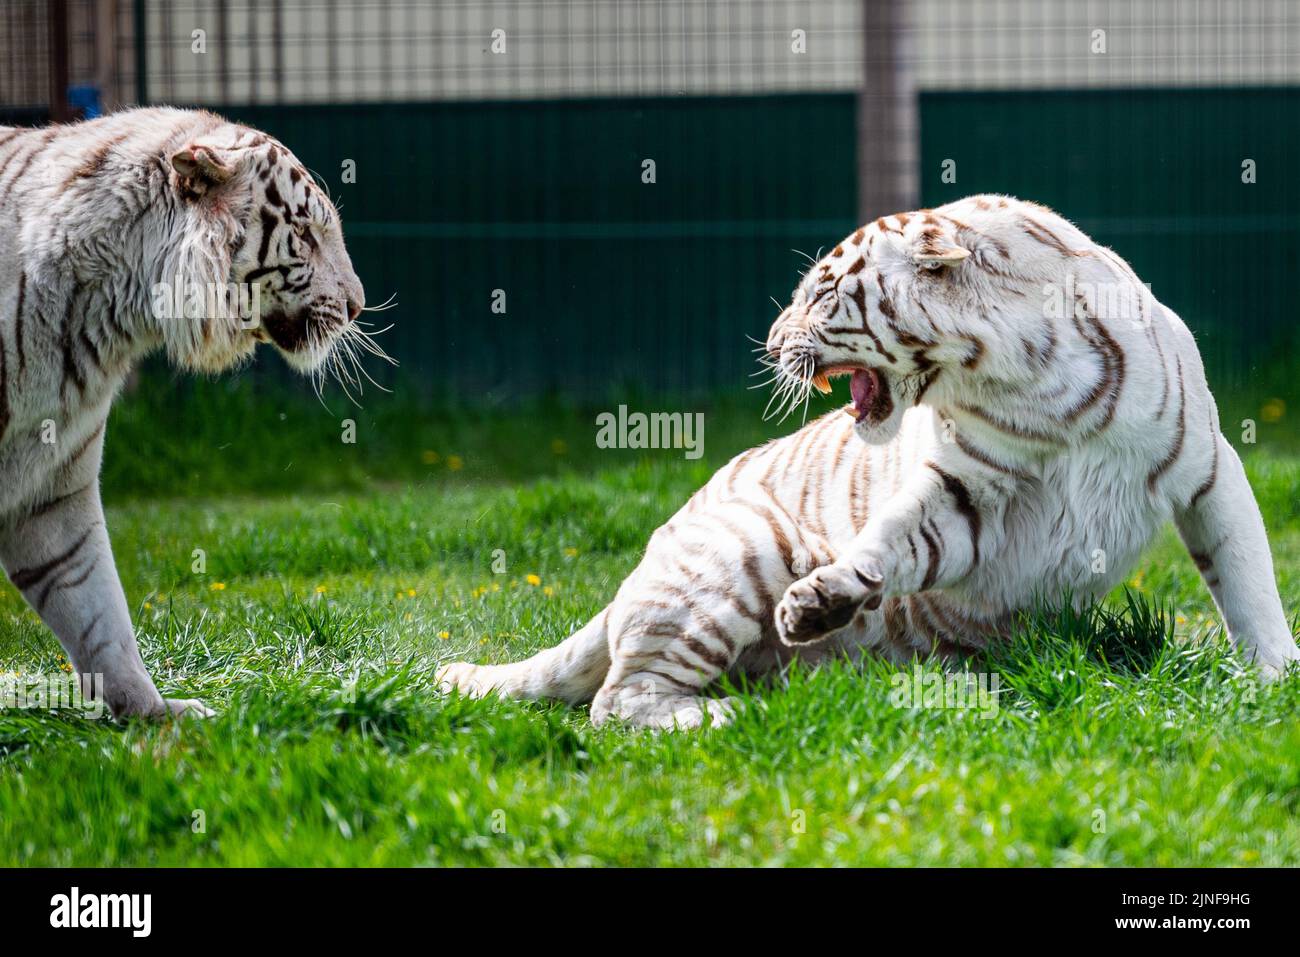 A closeup of white and black tigers looking each other and roaring Stock Photo